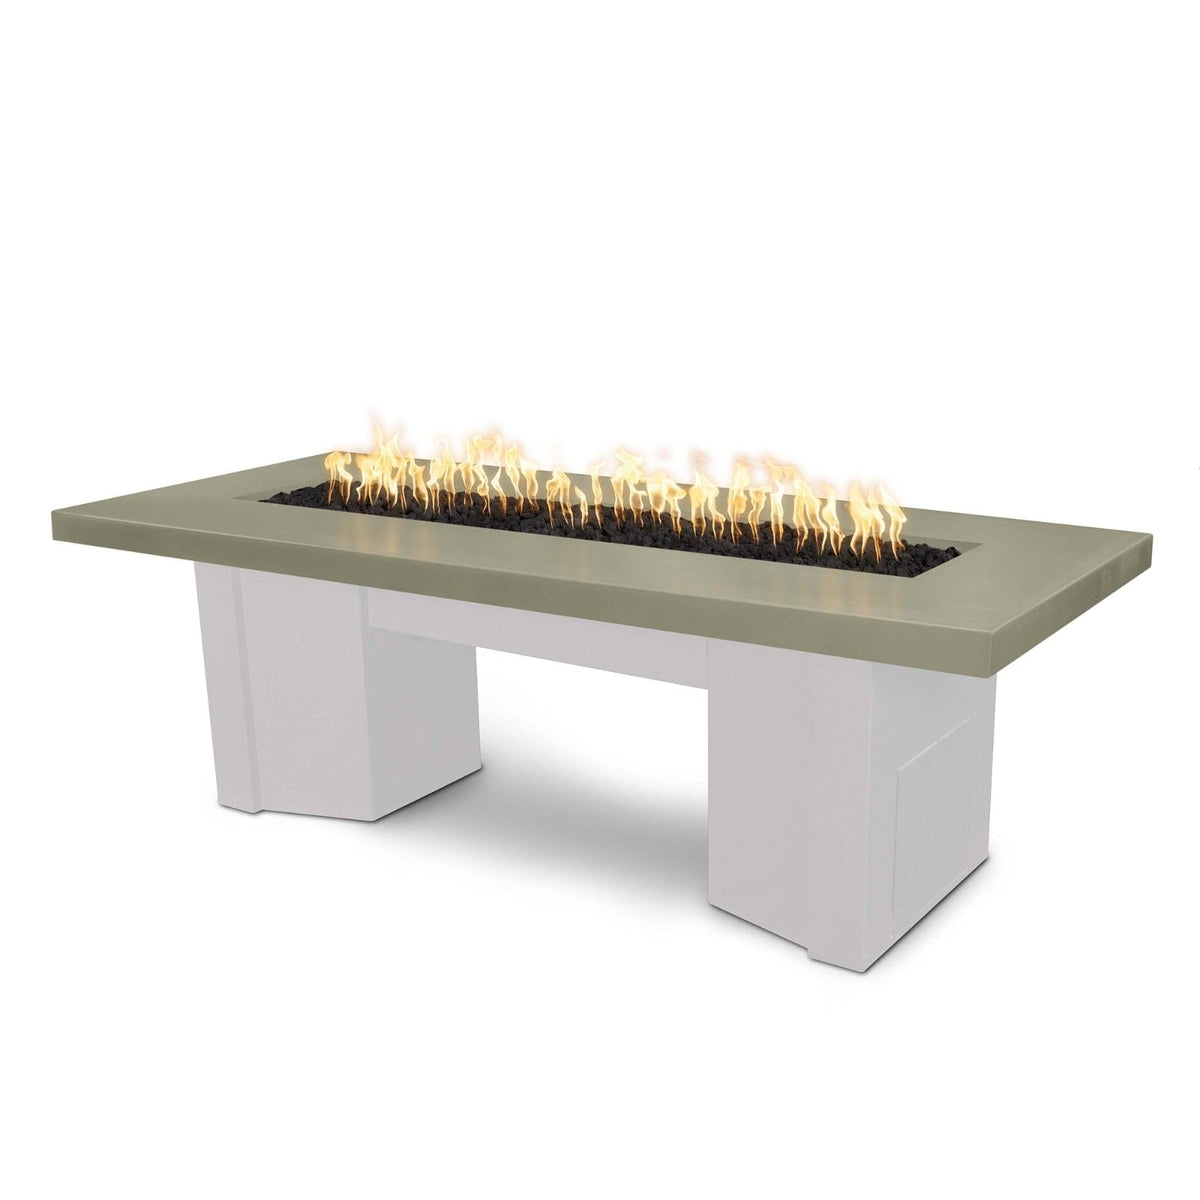 The Outdoor Plus Fire Features Ash (-ASH) / White Powder Coated Steel (-WHT) The Outdoor Plus 78&quot; Alameda Fire Table Smooth Concrete in Natural Gas - Match Lit with Flame Sense System / OPT-ALMGFRC78FSML-NG